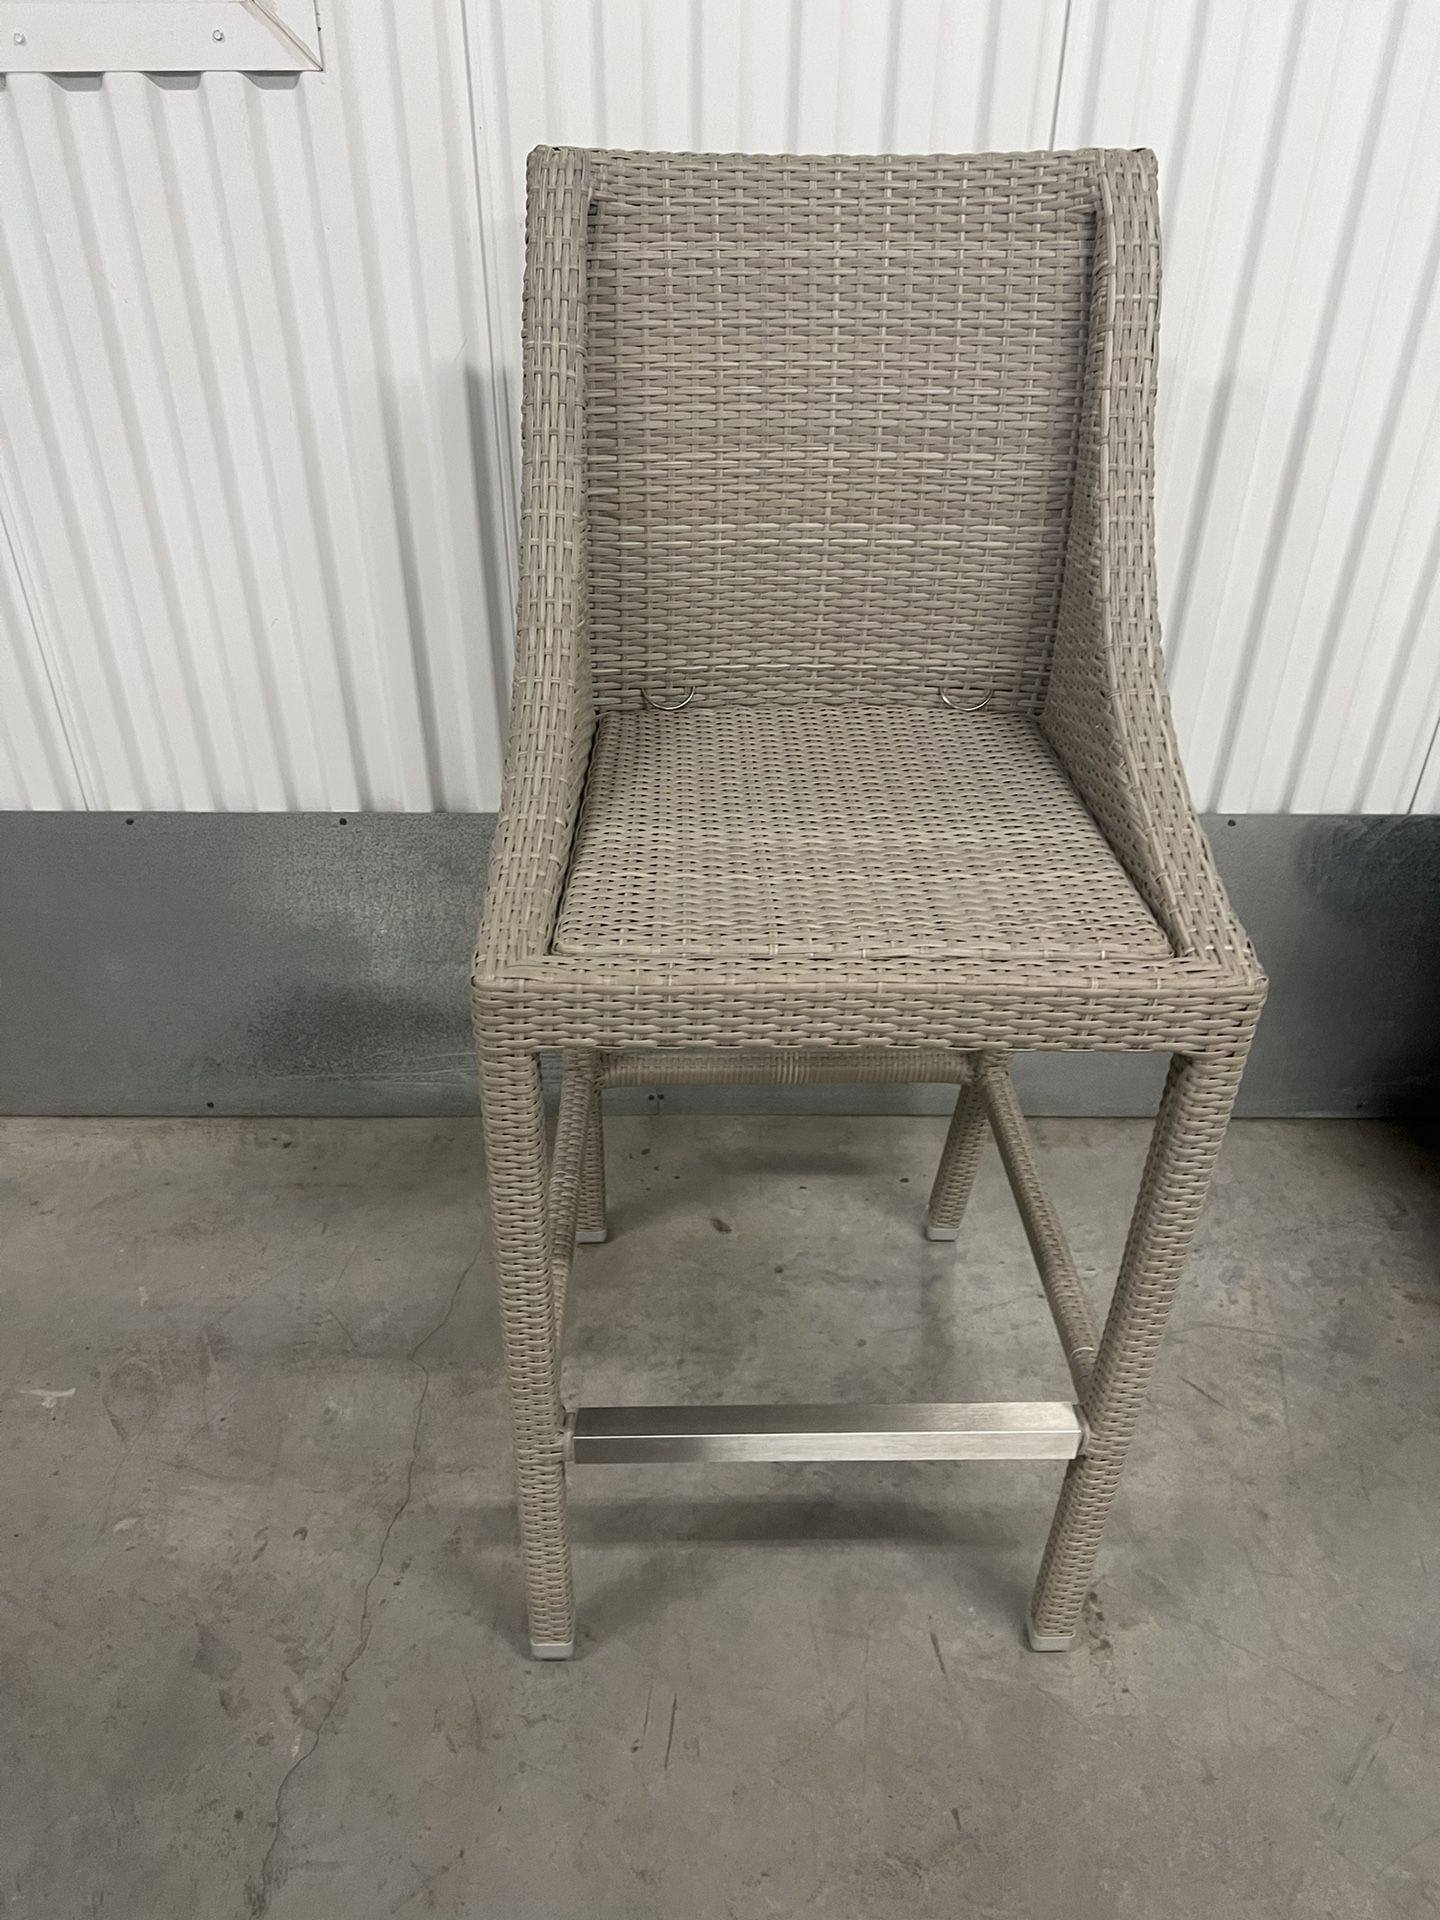 Contemporary indoor Outdoor Patio Rattan Bar Stool, Grey. The stool has metal frame and is in excellent condition. Very clean and ready to go! It’s cu